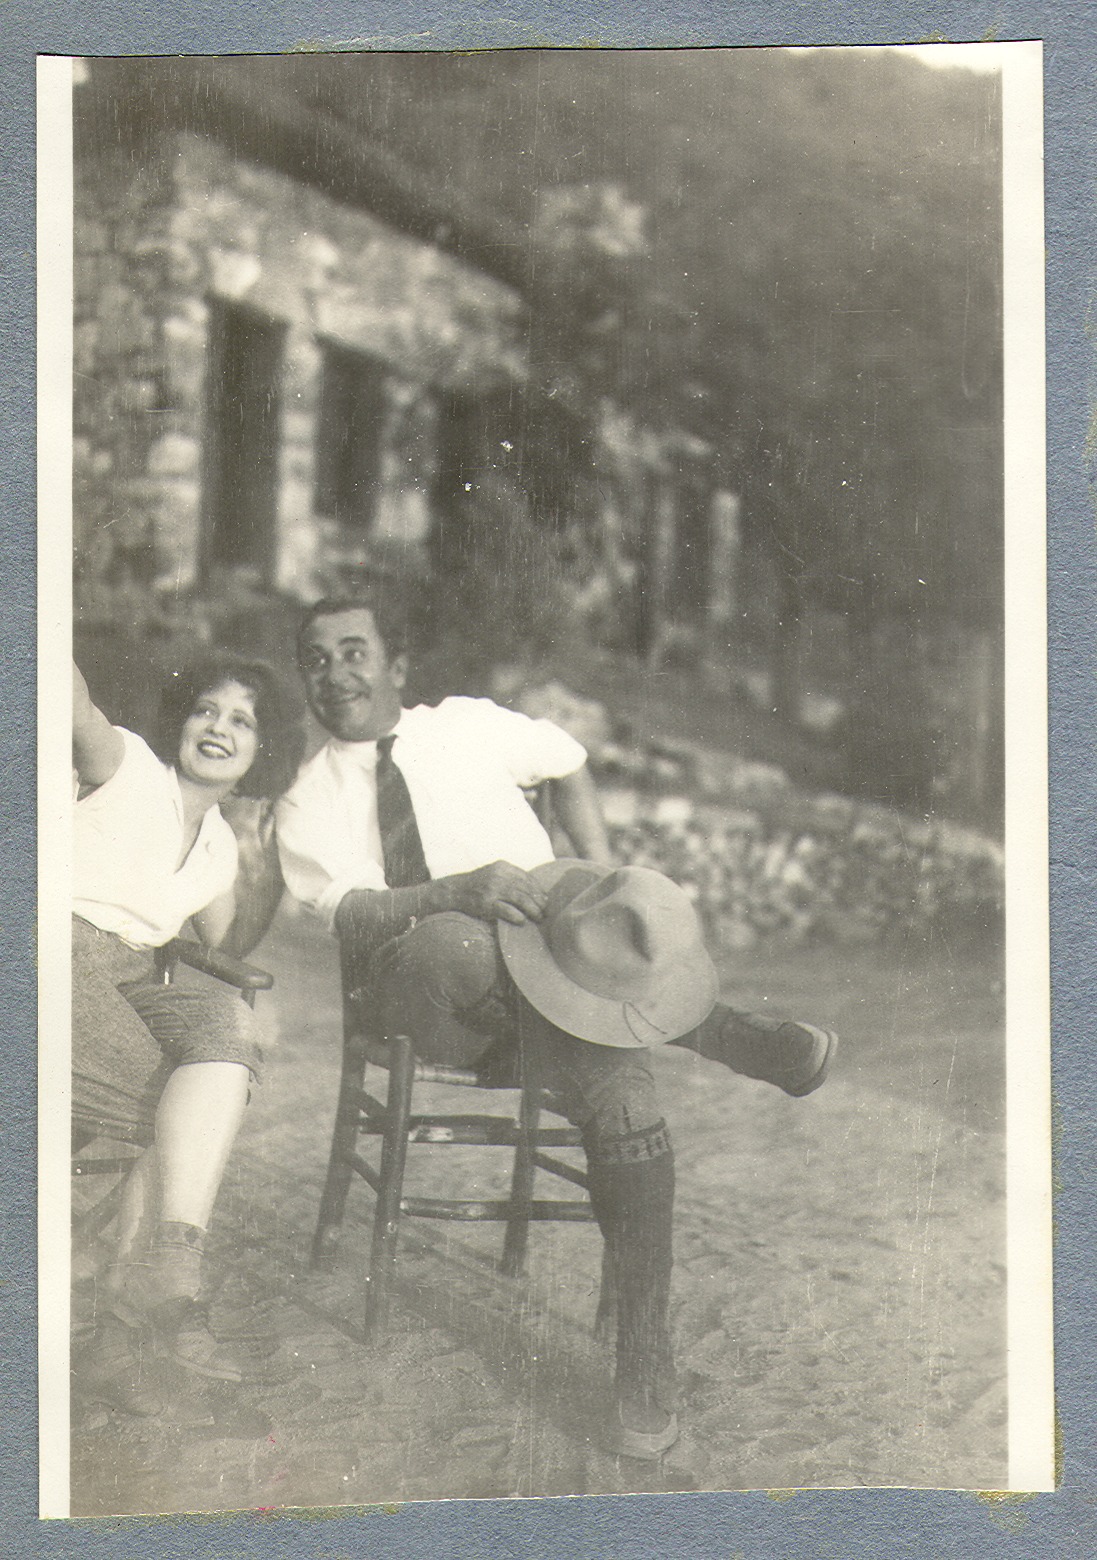 Clara Bow Bell with an unidentified man, seated on the lawn in chairs: photographic print